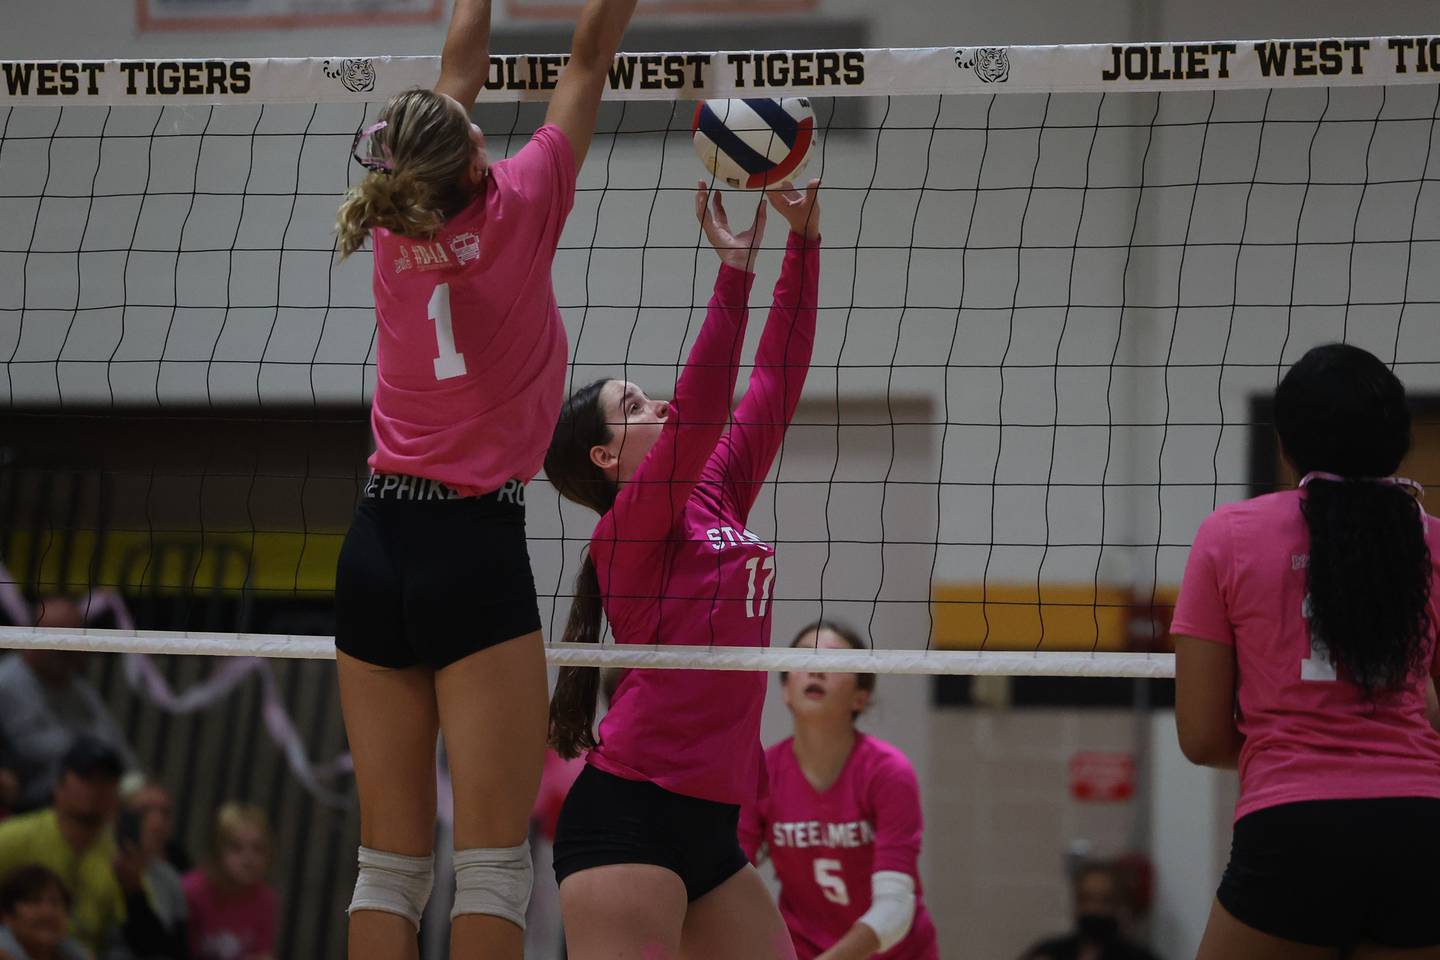 Joliet Central’s Sadie Johnson pushes the ball over against Joliet West in the JTHS Pink Heals match. Tuesday, Oct. 4, 2022, in Joliet.